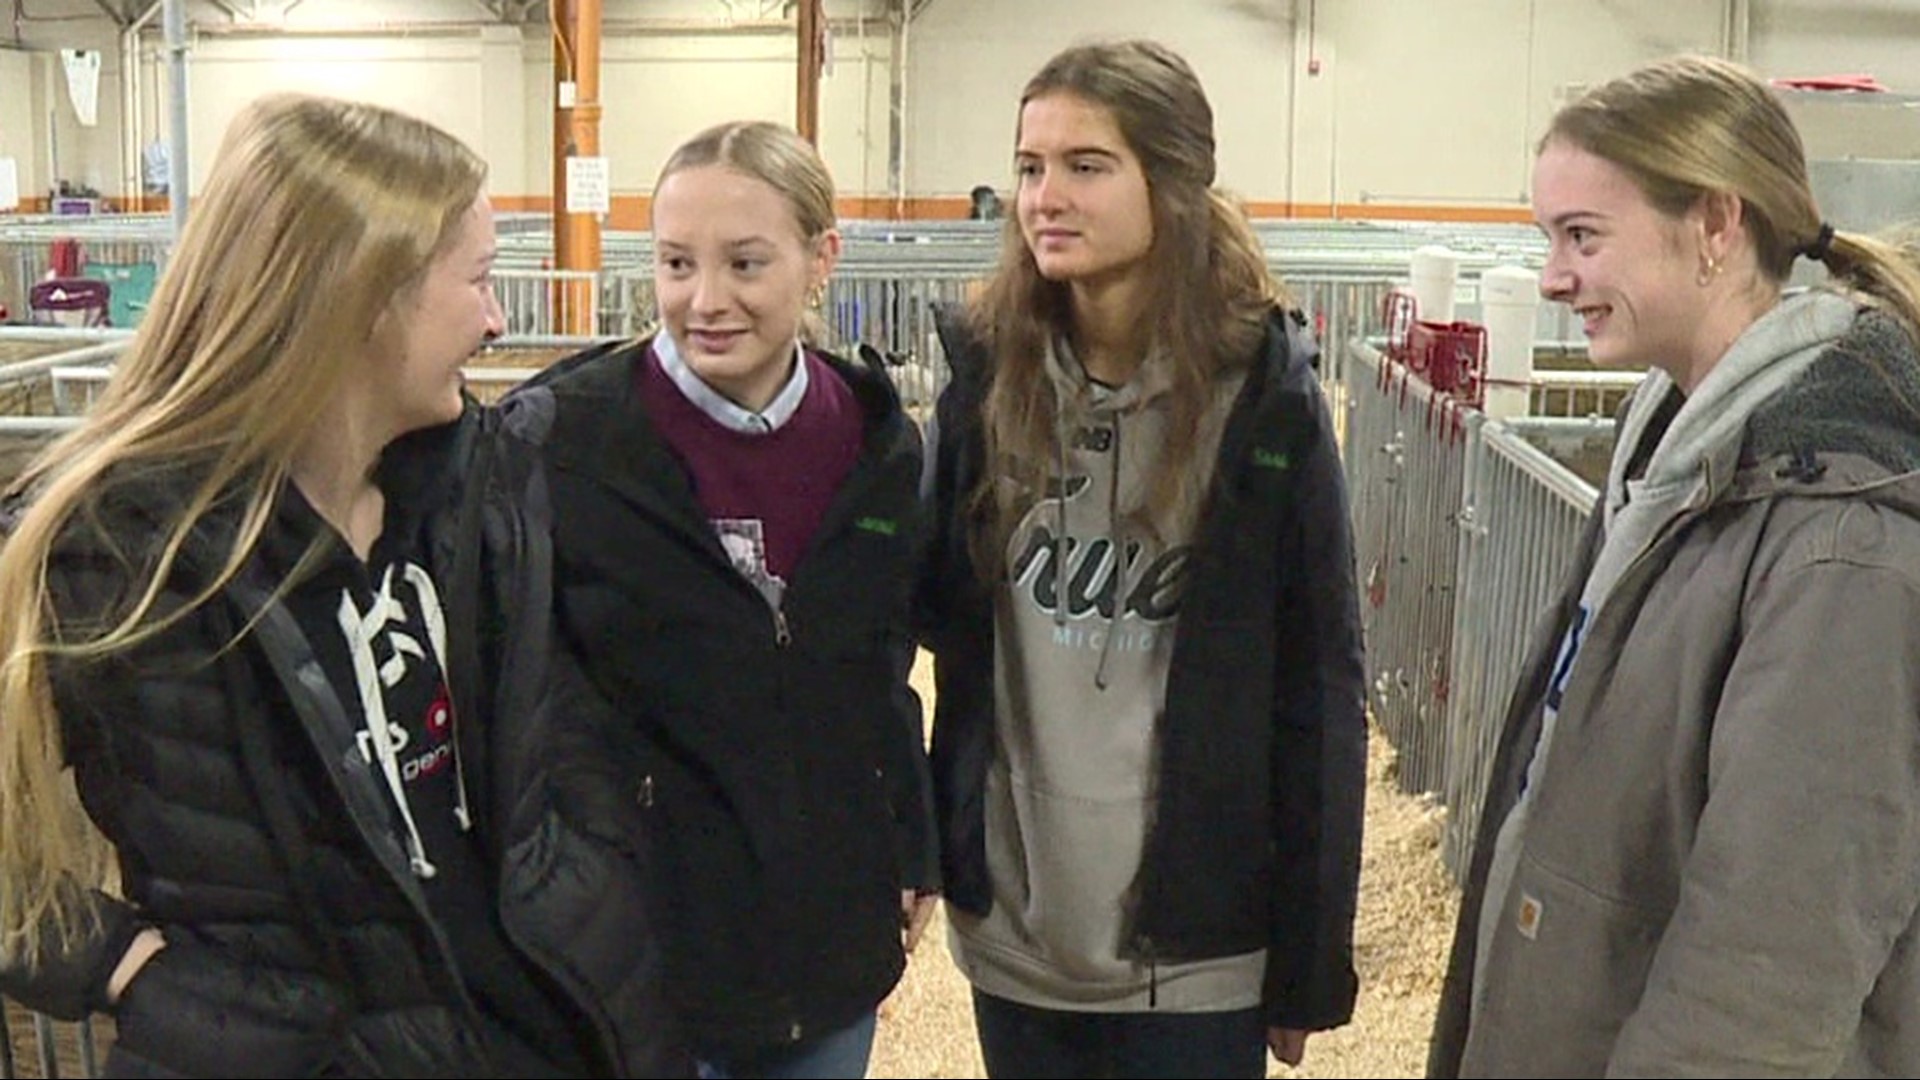 Meet "the Quads," quadruplet sisters competing together at the Pennsylvania Farm Show.